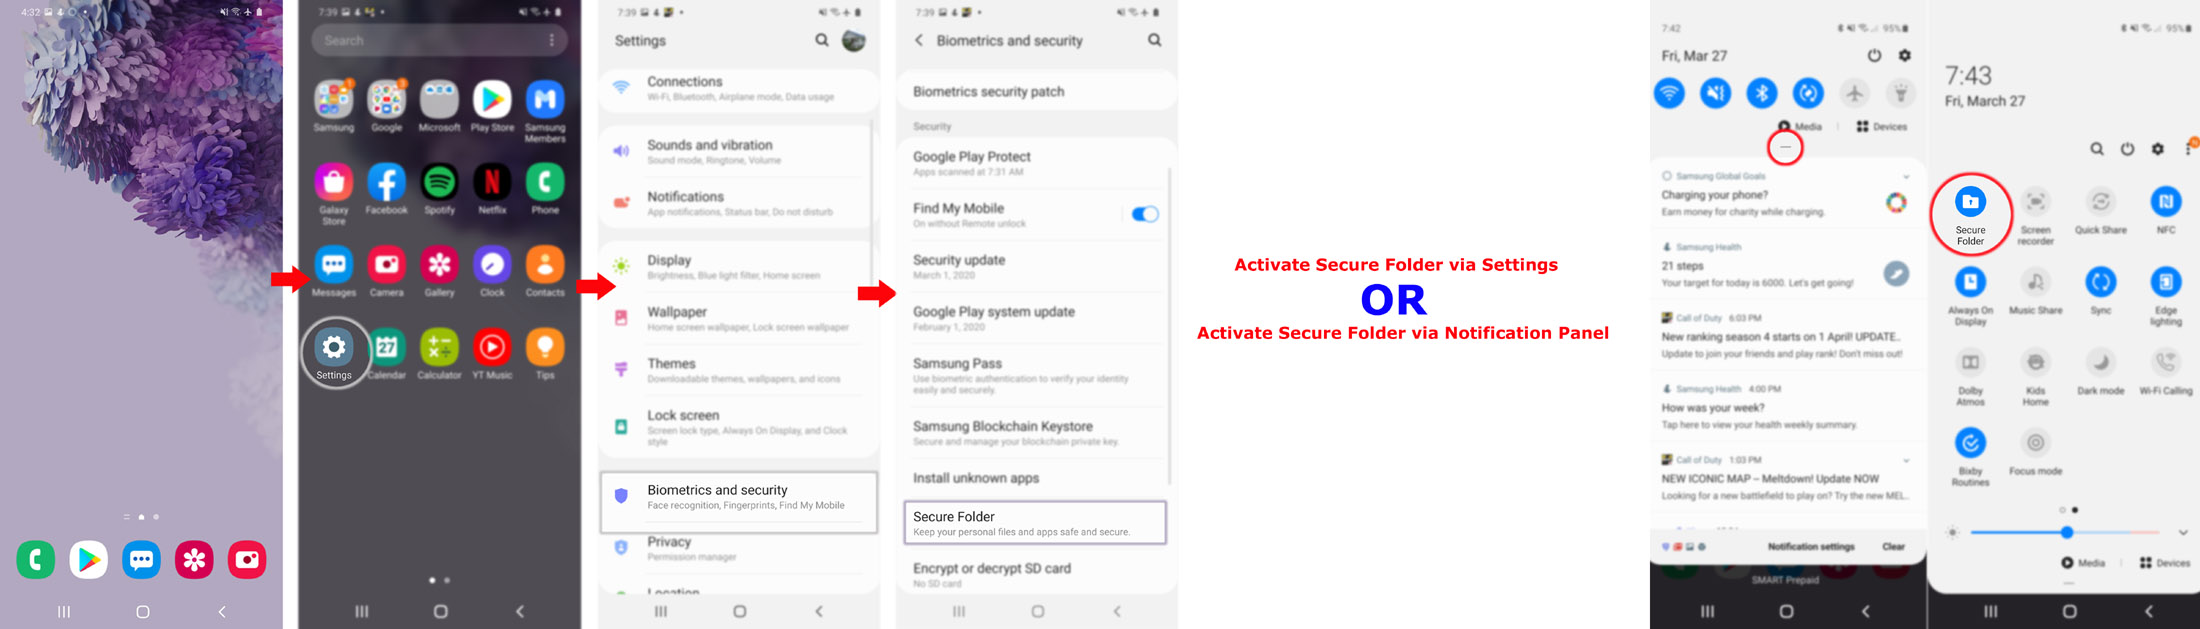 hide photos on galaxy s20 - activate security folder